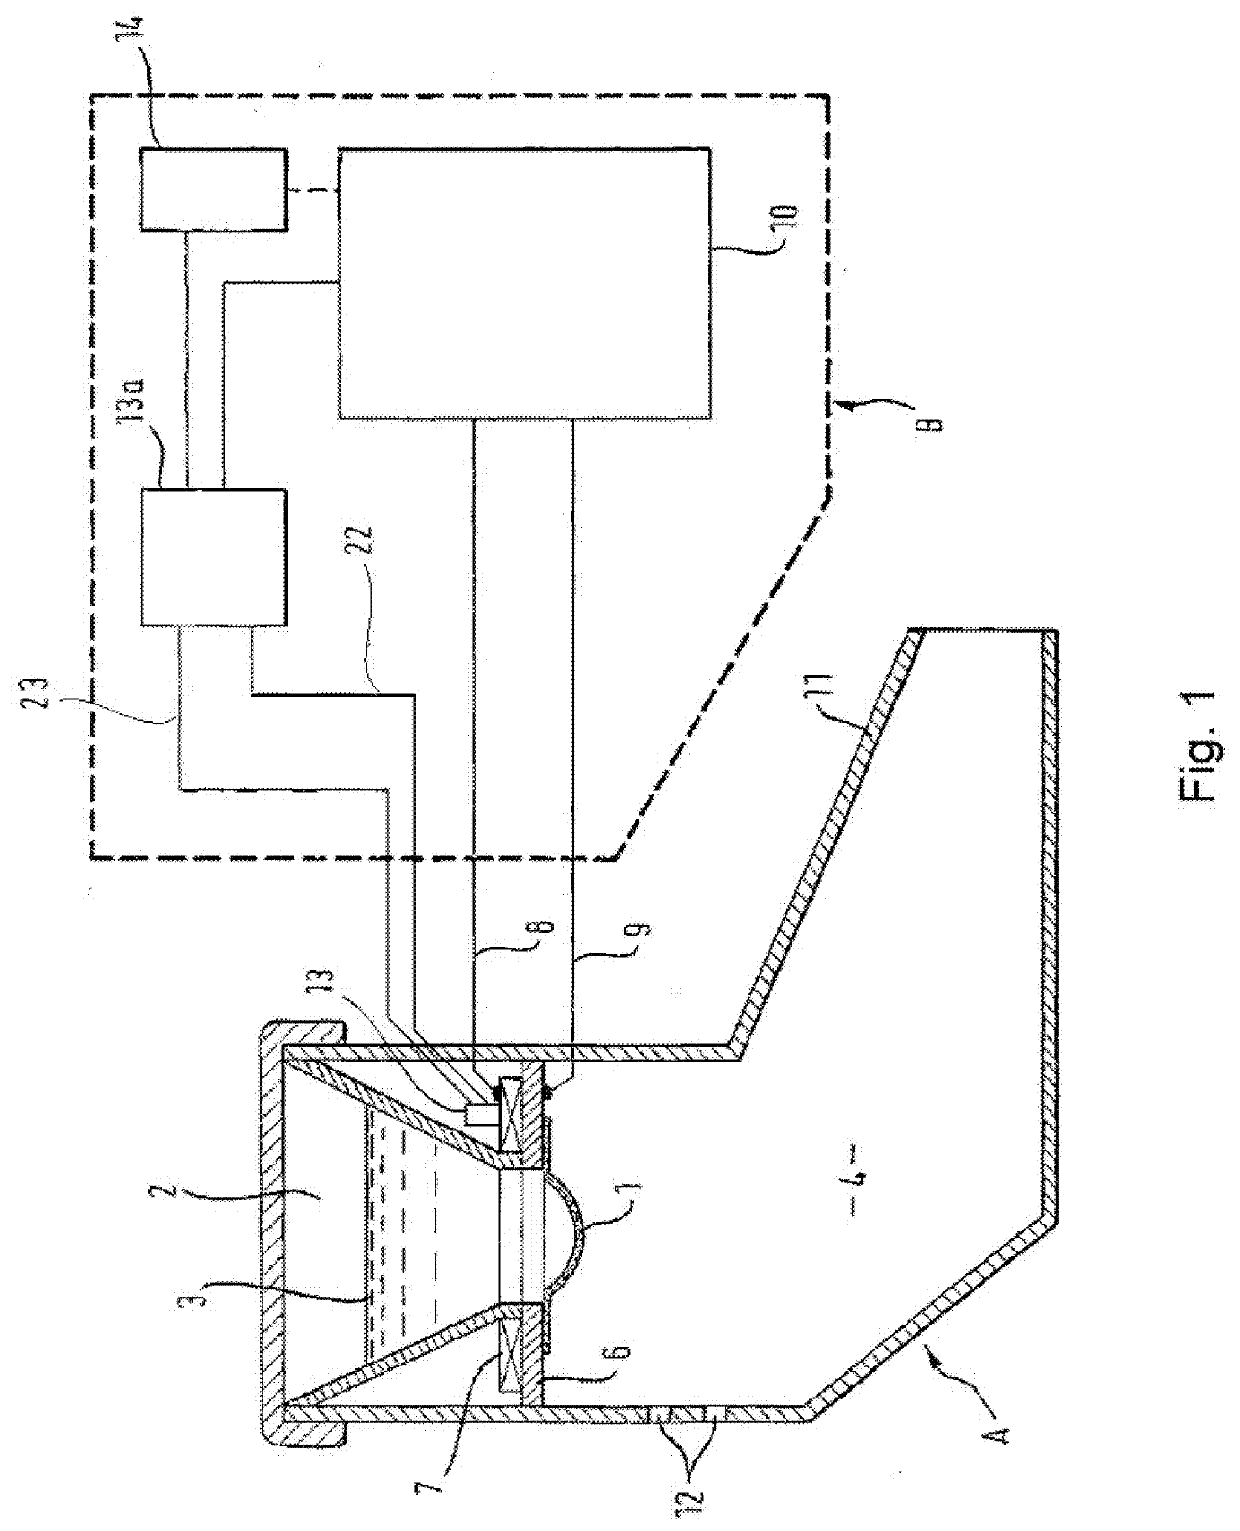 Aerosol delivery device and method of operating the aerosol delivery device